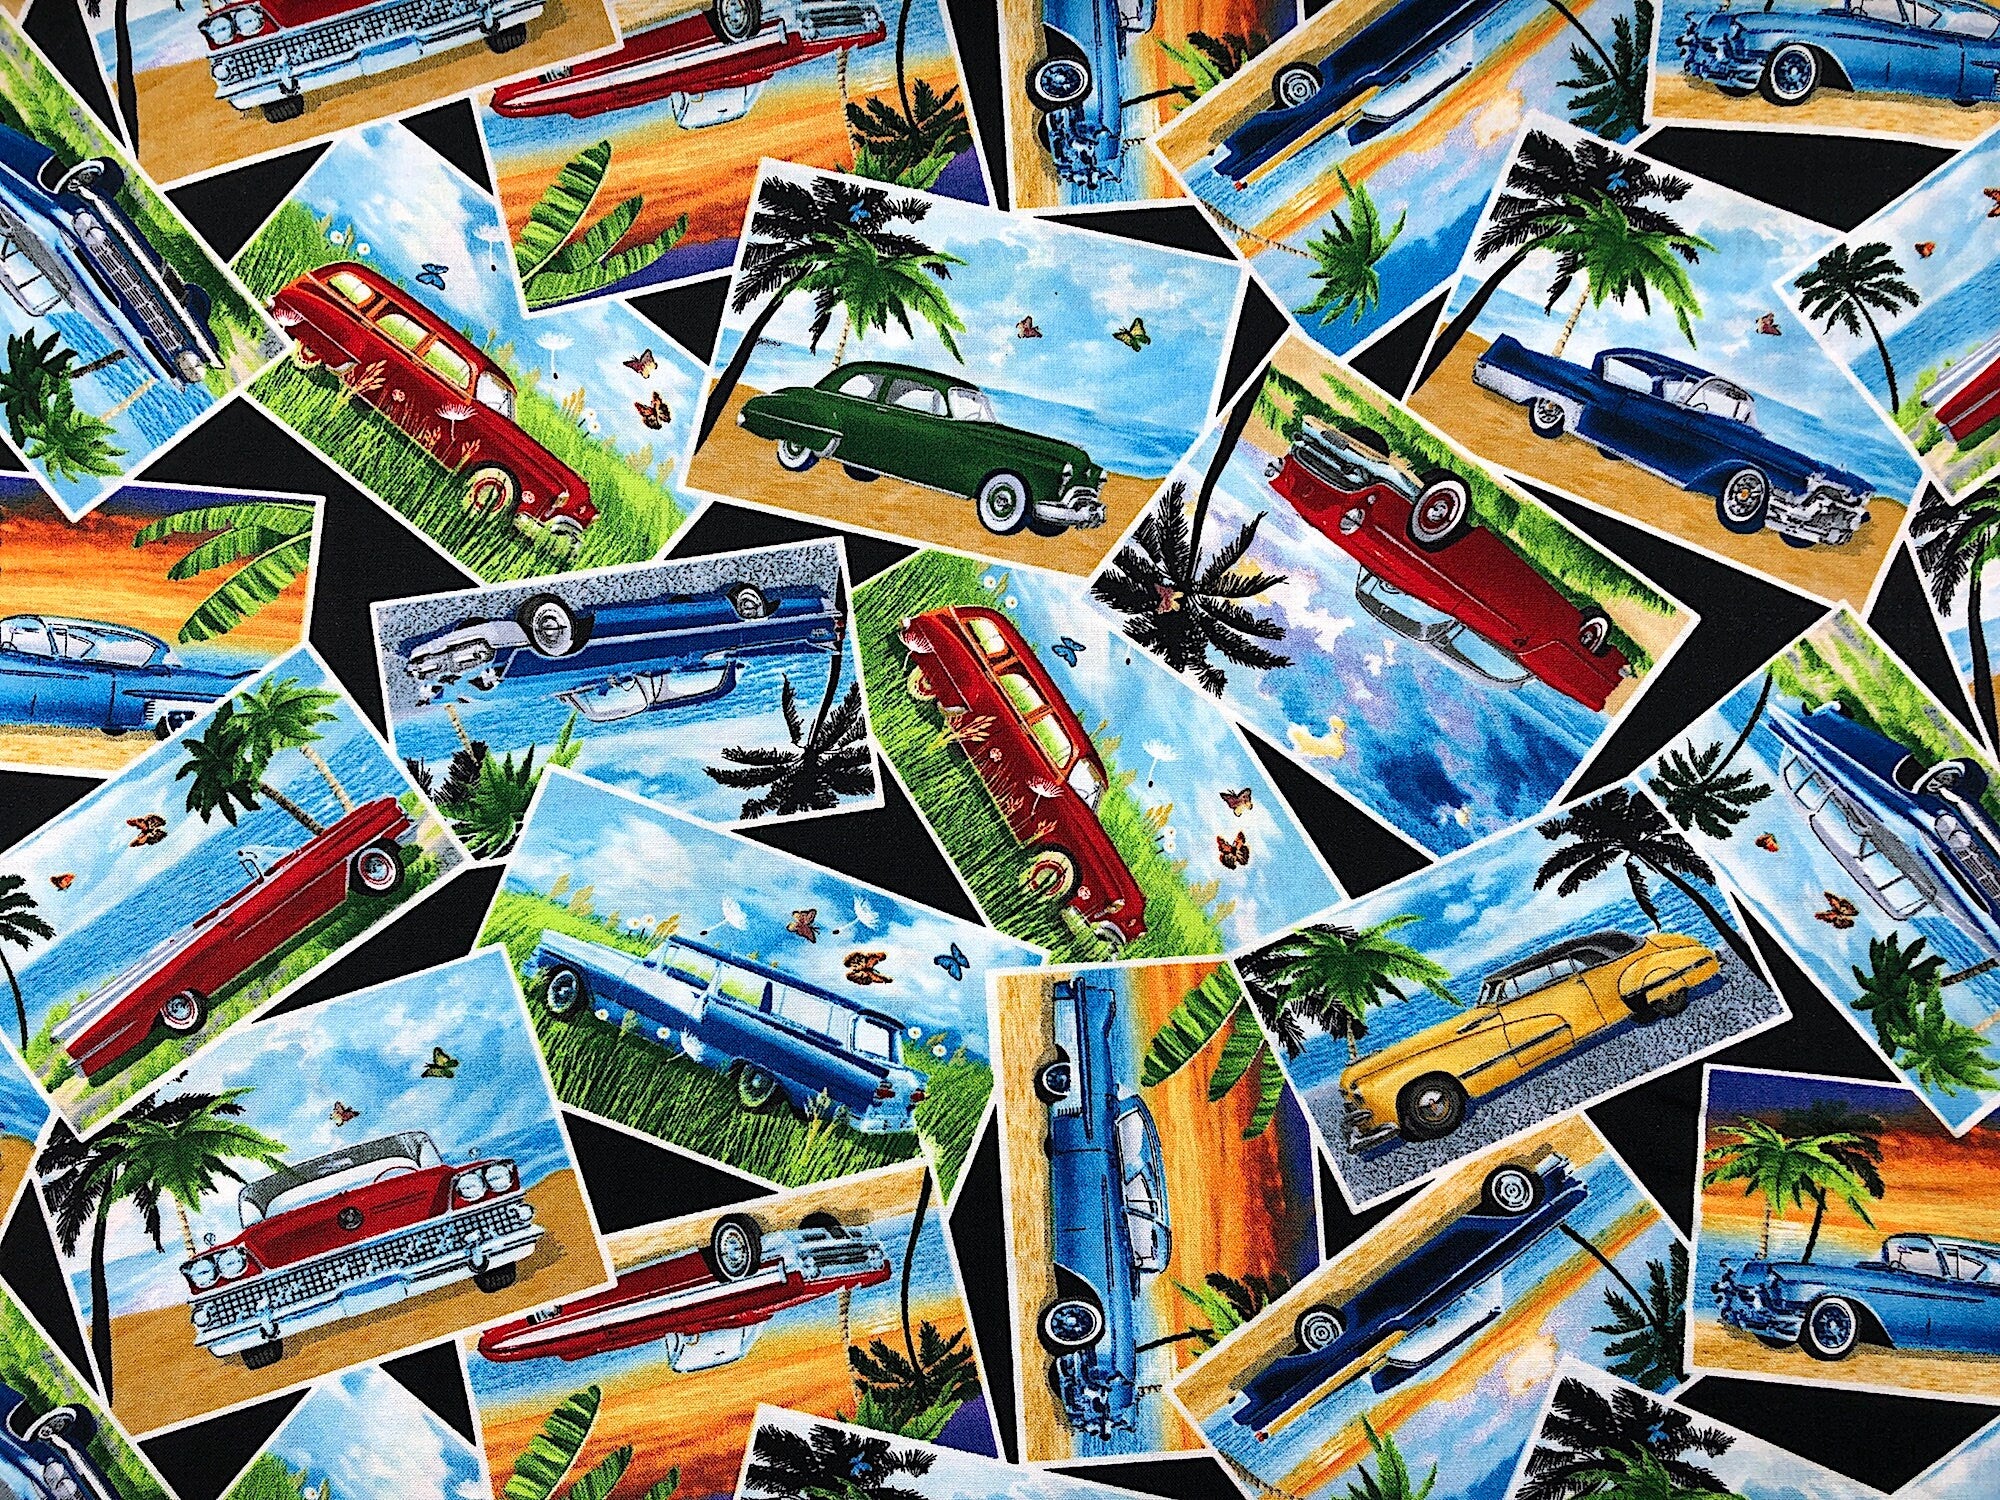 This fabric is covered with many different old cars in different scenes.